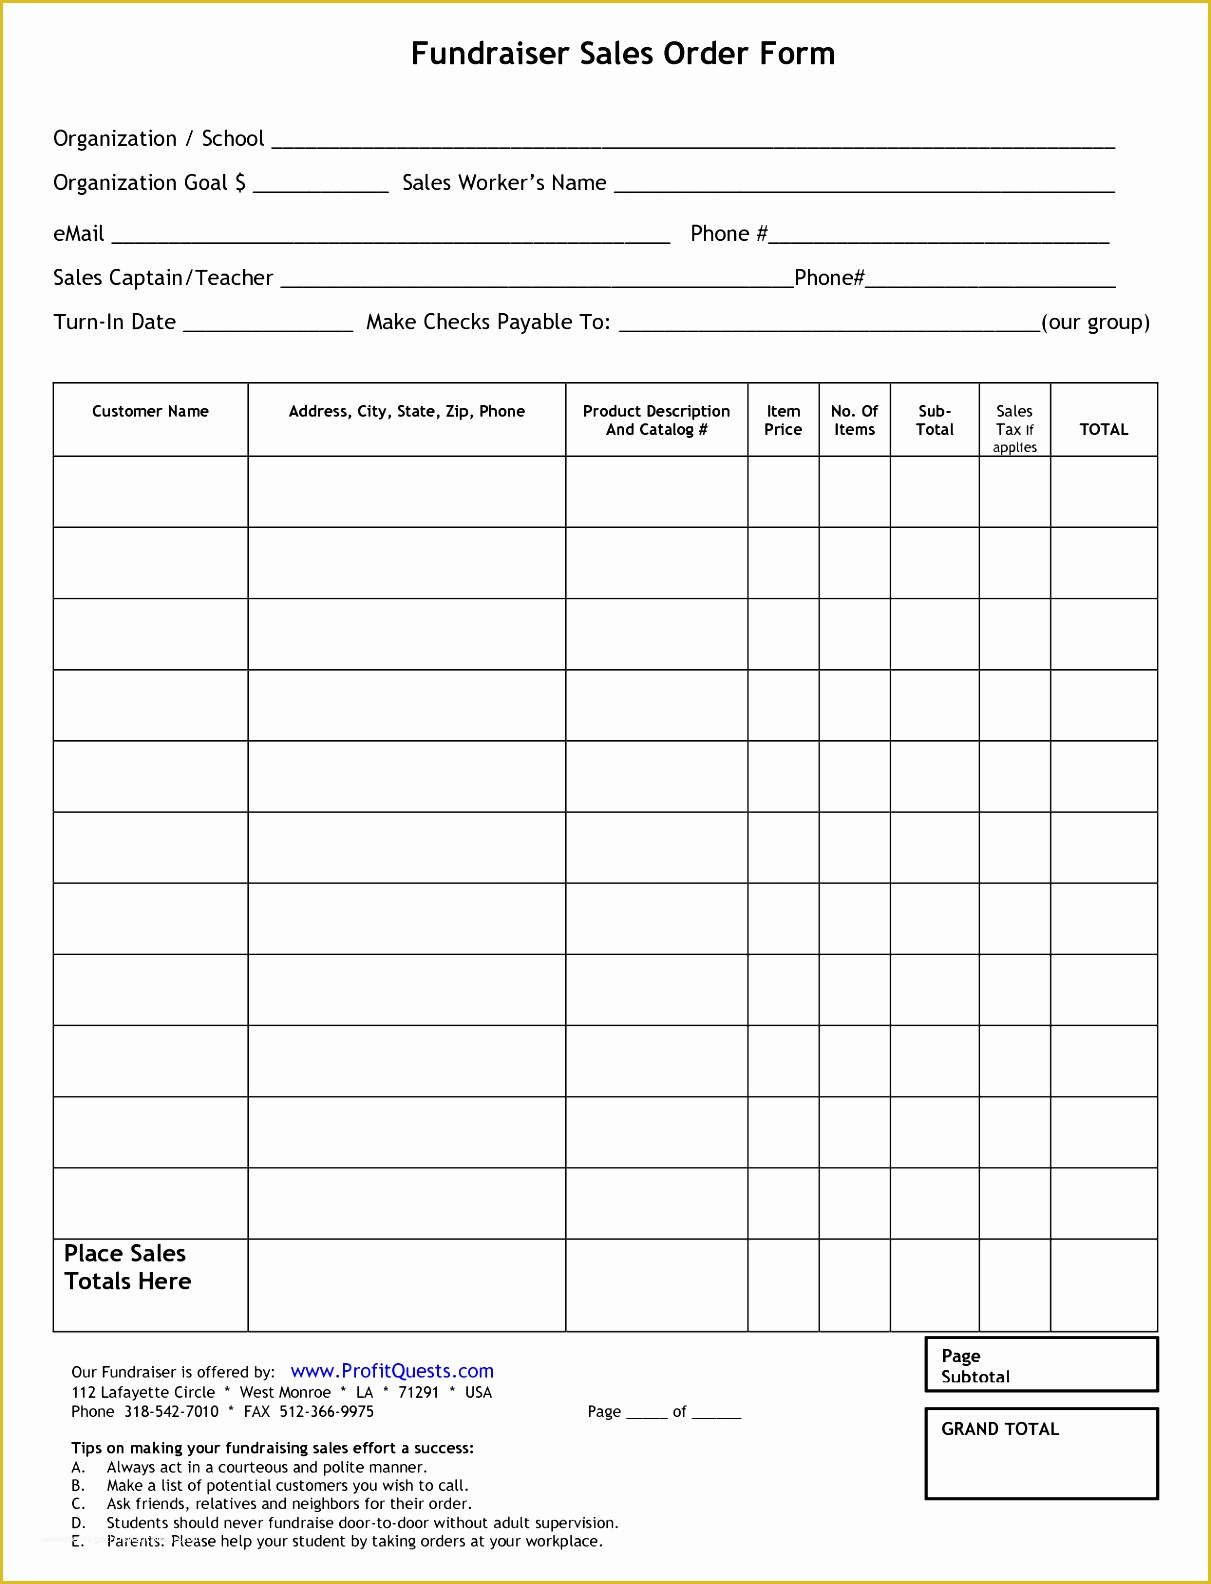 Fundraising forms Templates Free Of 5 Sample order form Layout Sampletemplatess